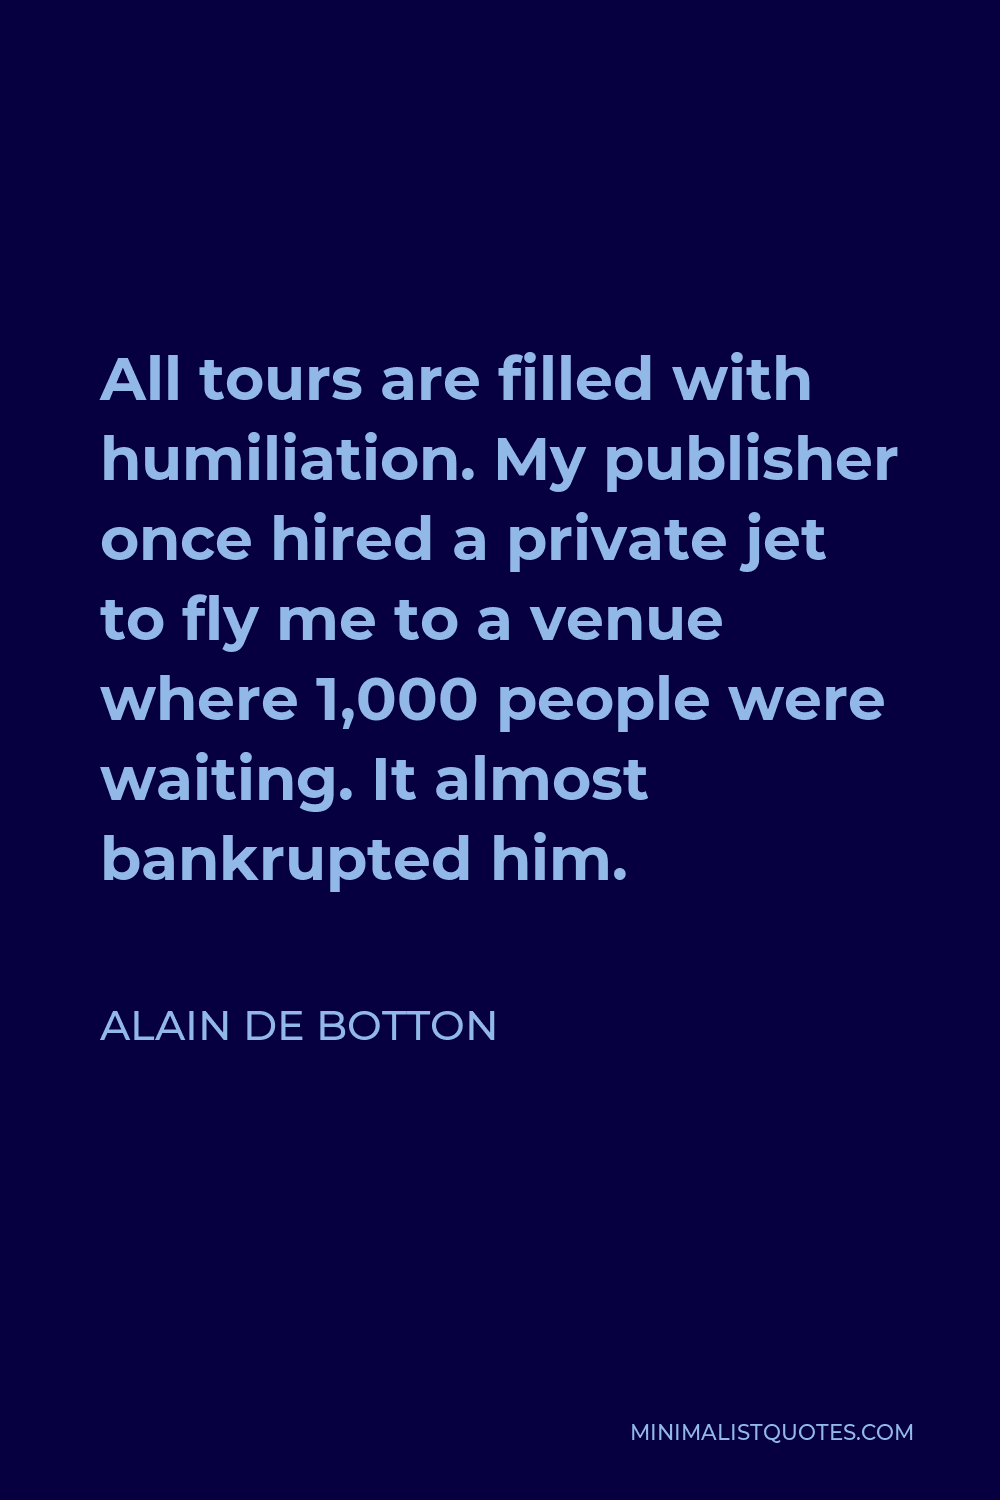 Alain de Botton Quote - All tours are filled with humiliation. My publisher once hired a private jet to fly me to a venue where 1,000 people were waiting. It almost bankrupted him.